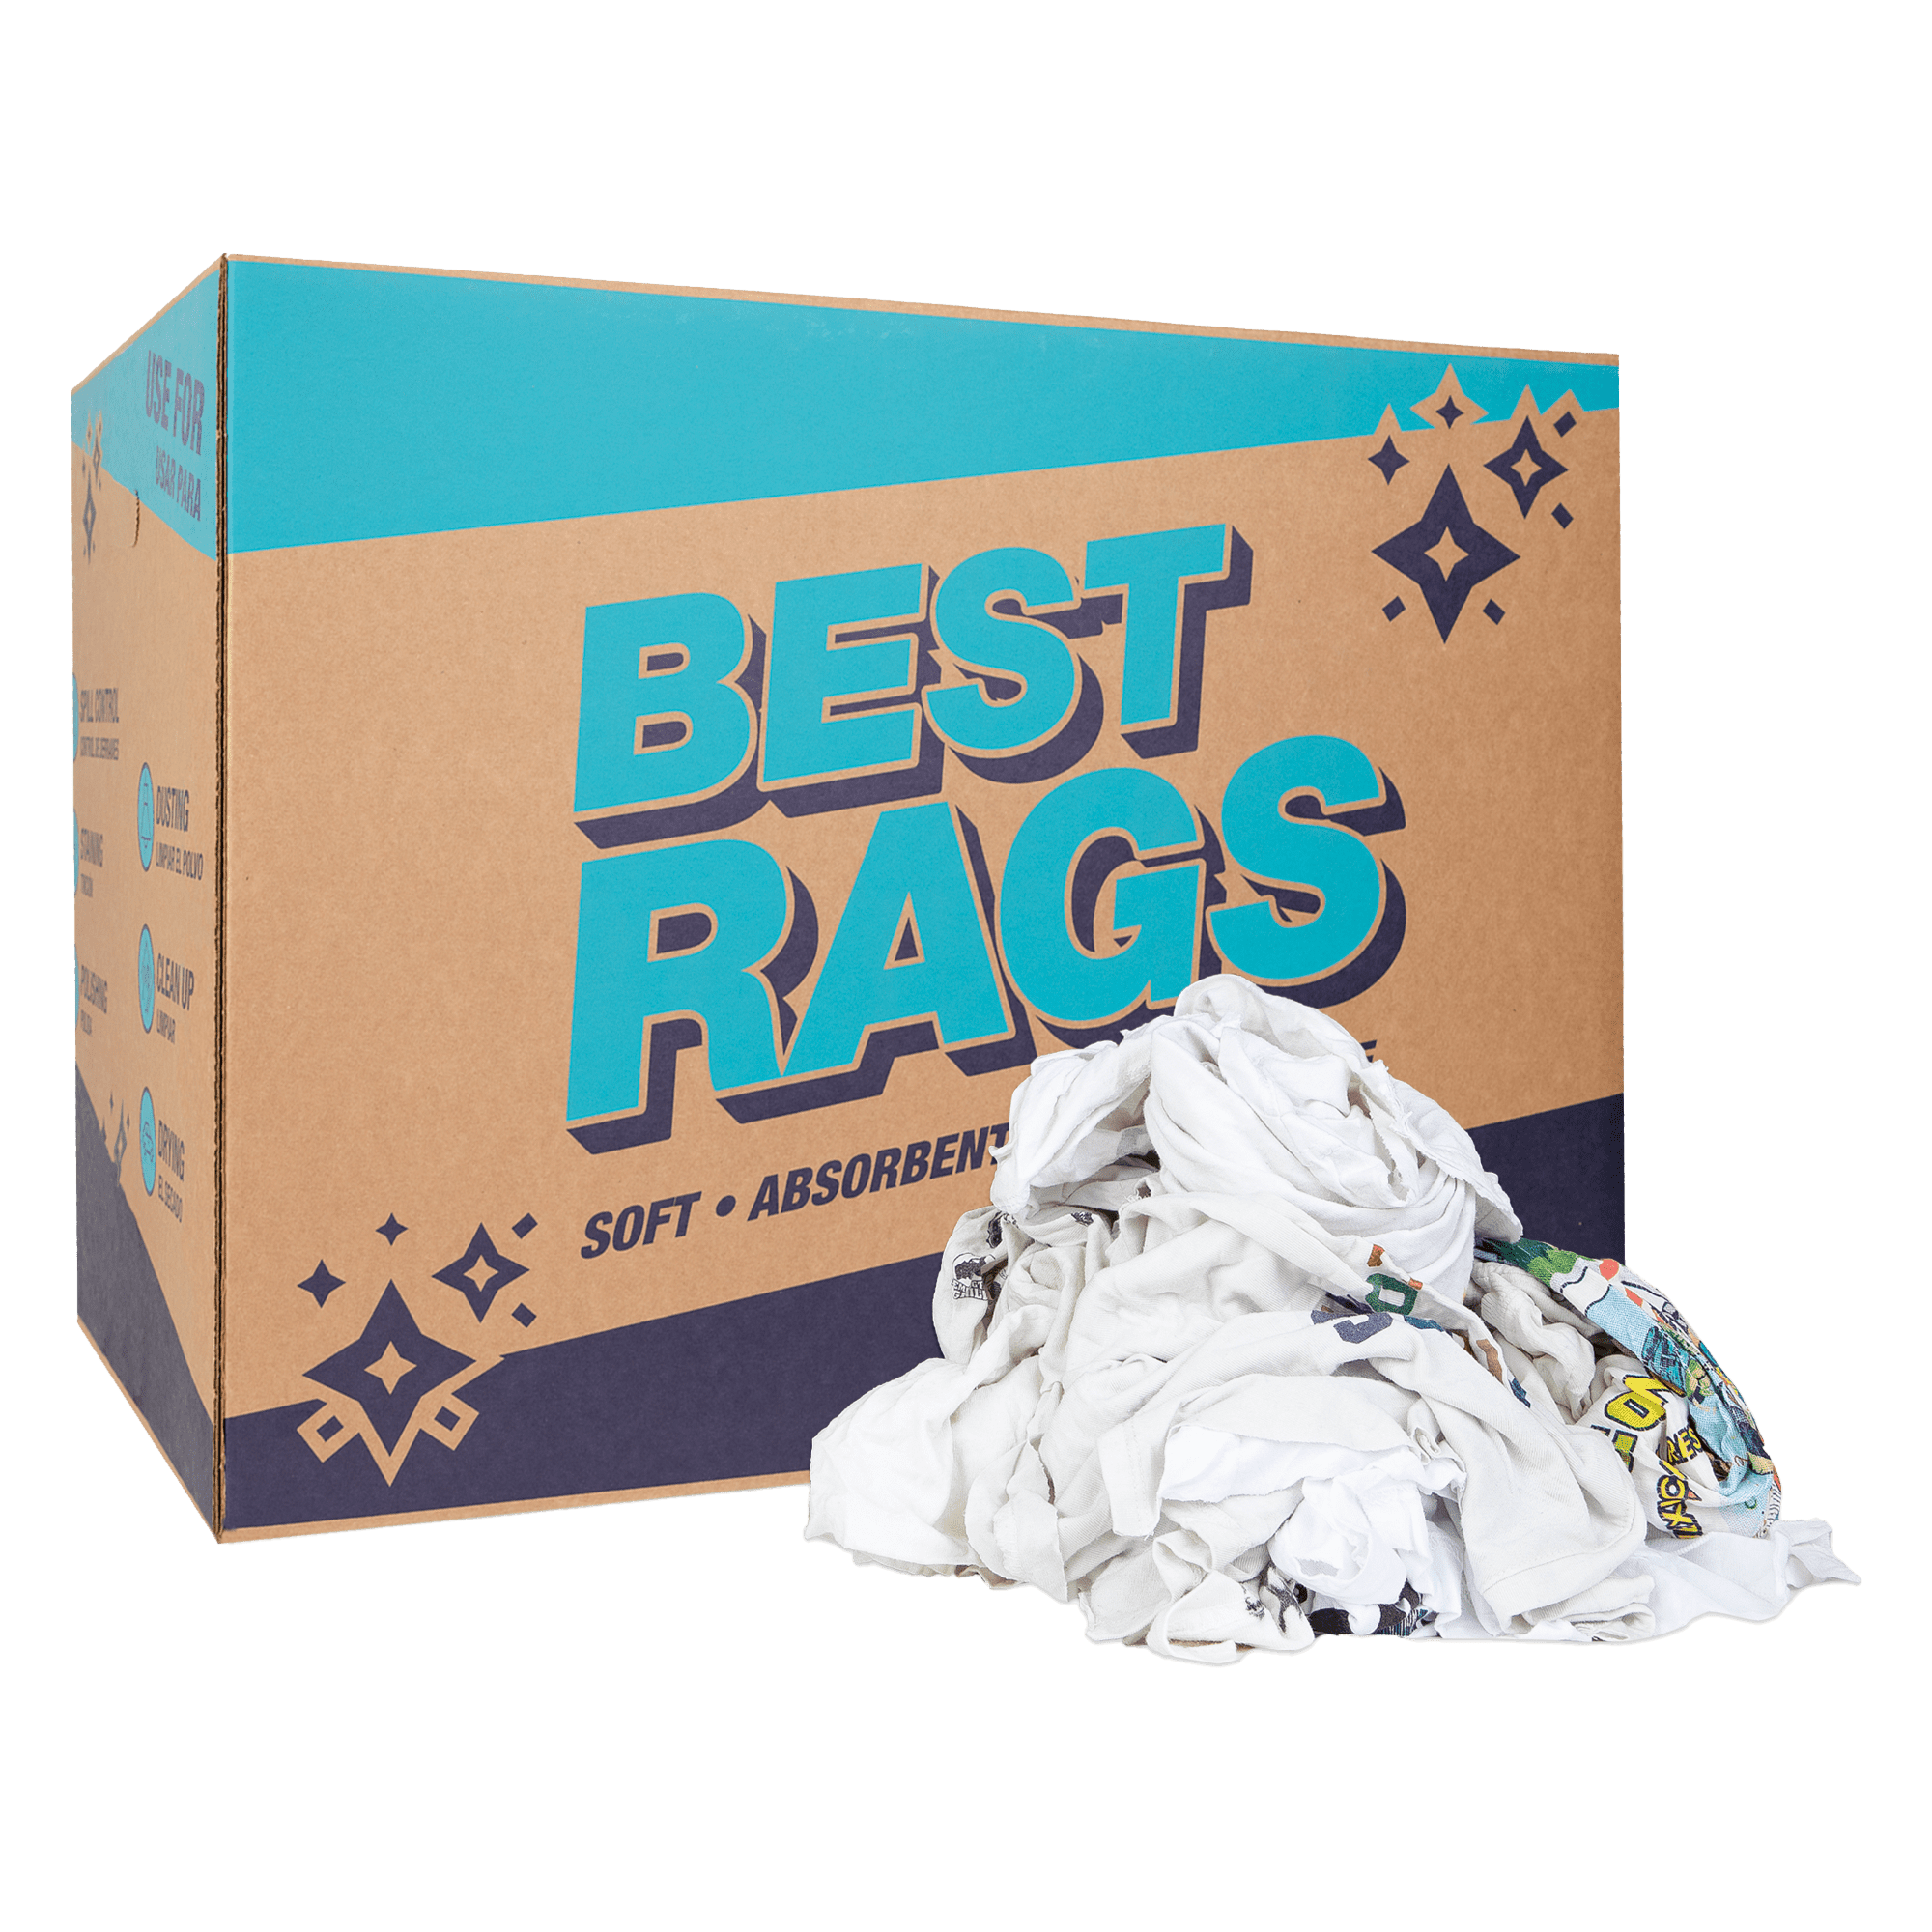 SupremePlus-Ultimate Cleaning Shop Rags in a Box-High-Quality